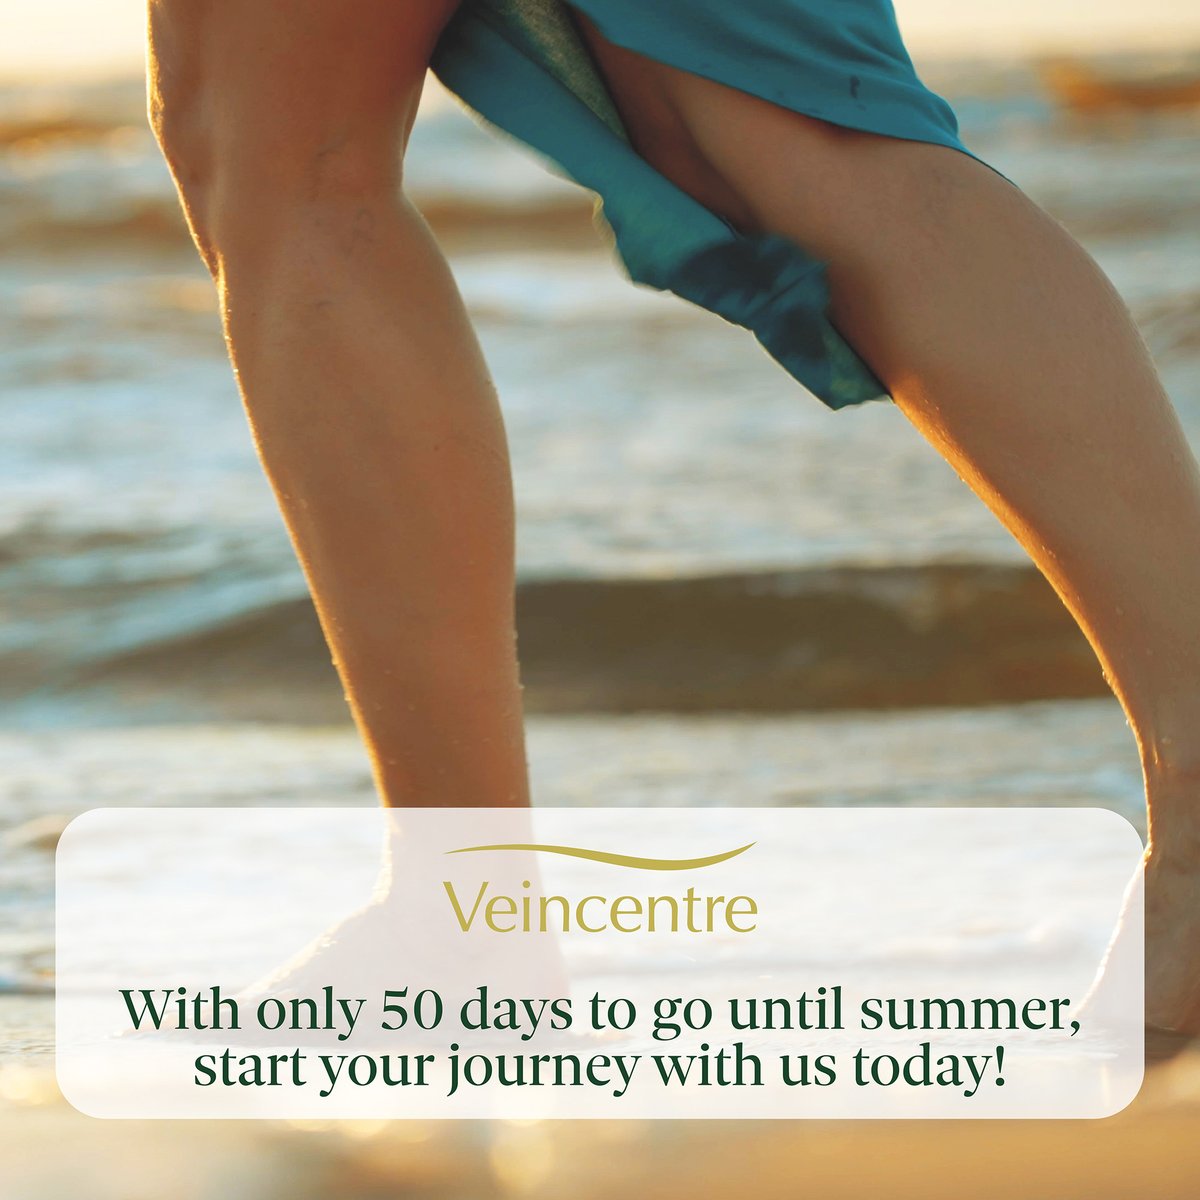 With just 50 days to go until summer, now is the perfect time to book your Veincentre consultation with one of our specialist consultants. ⛱️🦵 Be happy with your legs again and give our friendly advisers a call. #varicoseveins #threadveins #summer #veinhealth